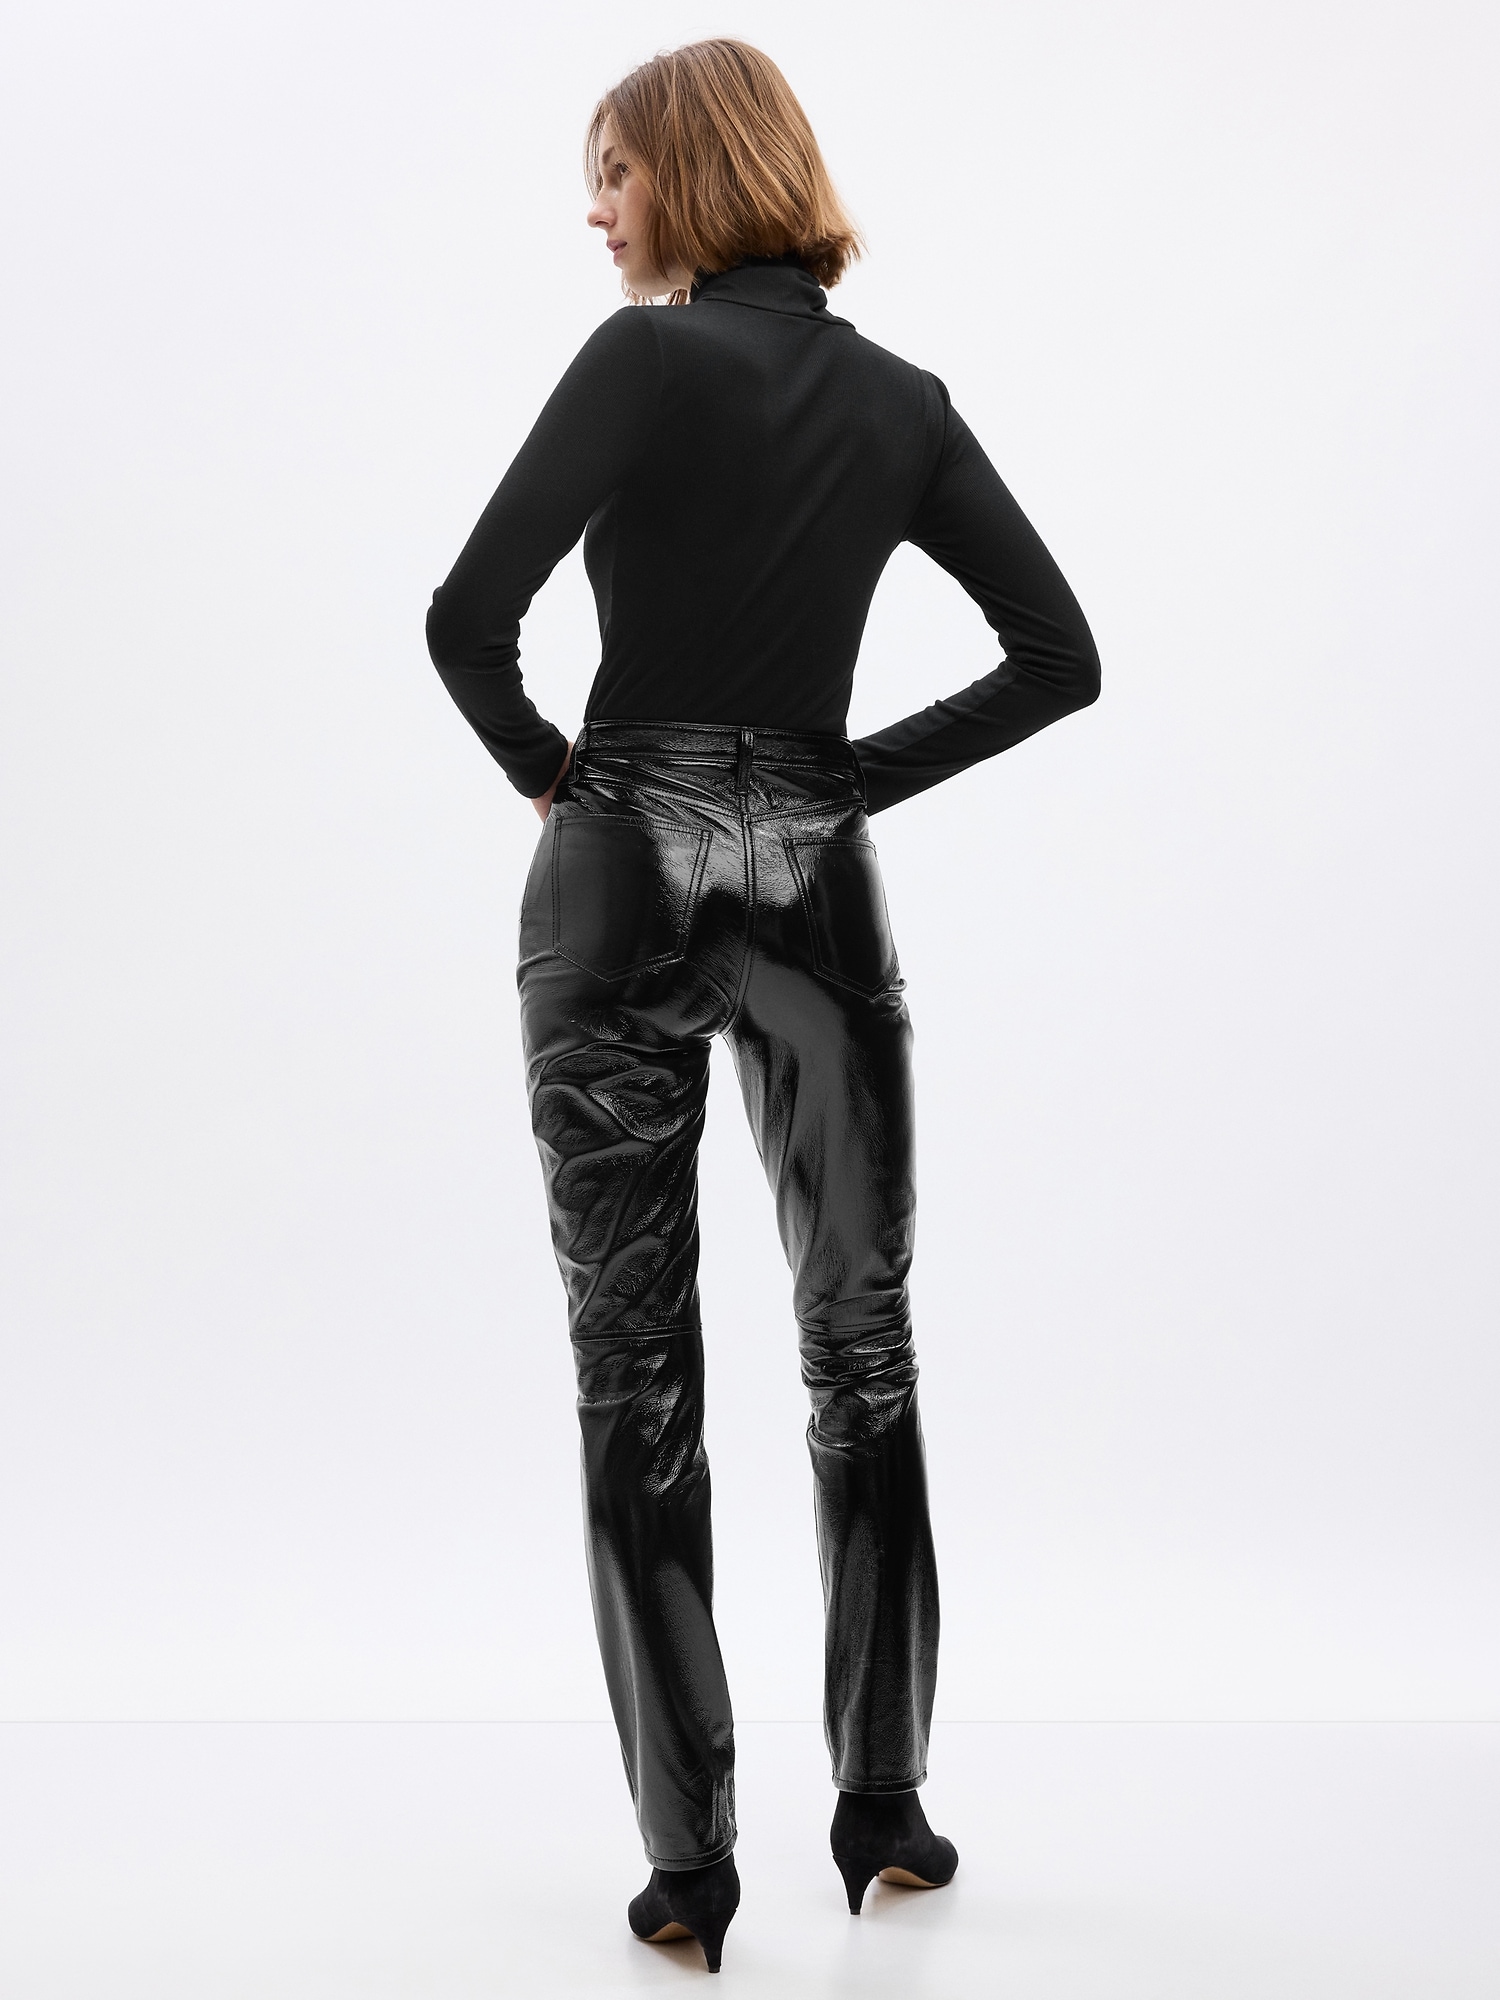 JDEFEG Petite Leather Pants for Women Womens High Waisted Slim